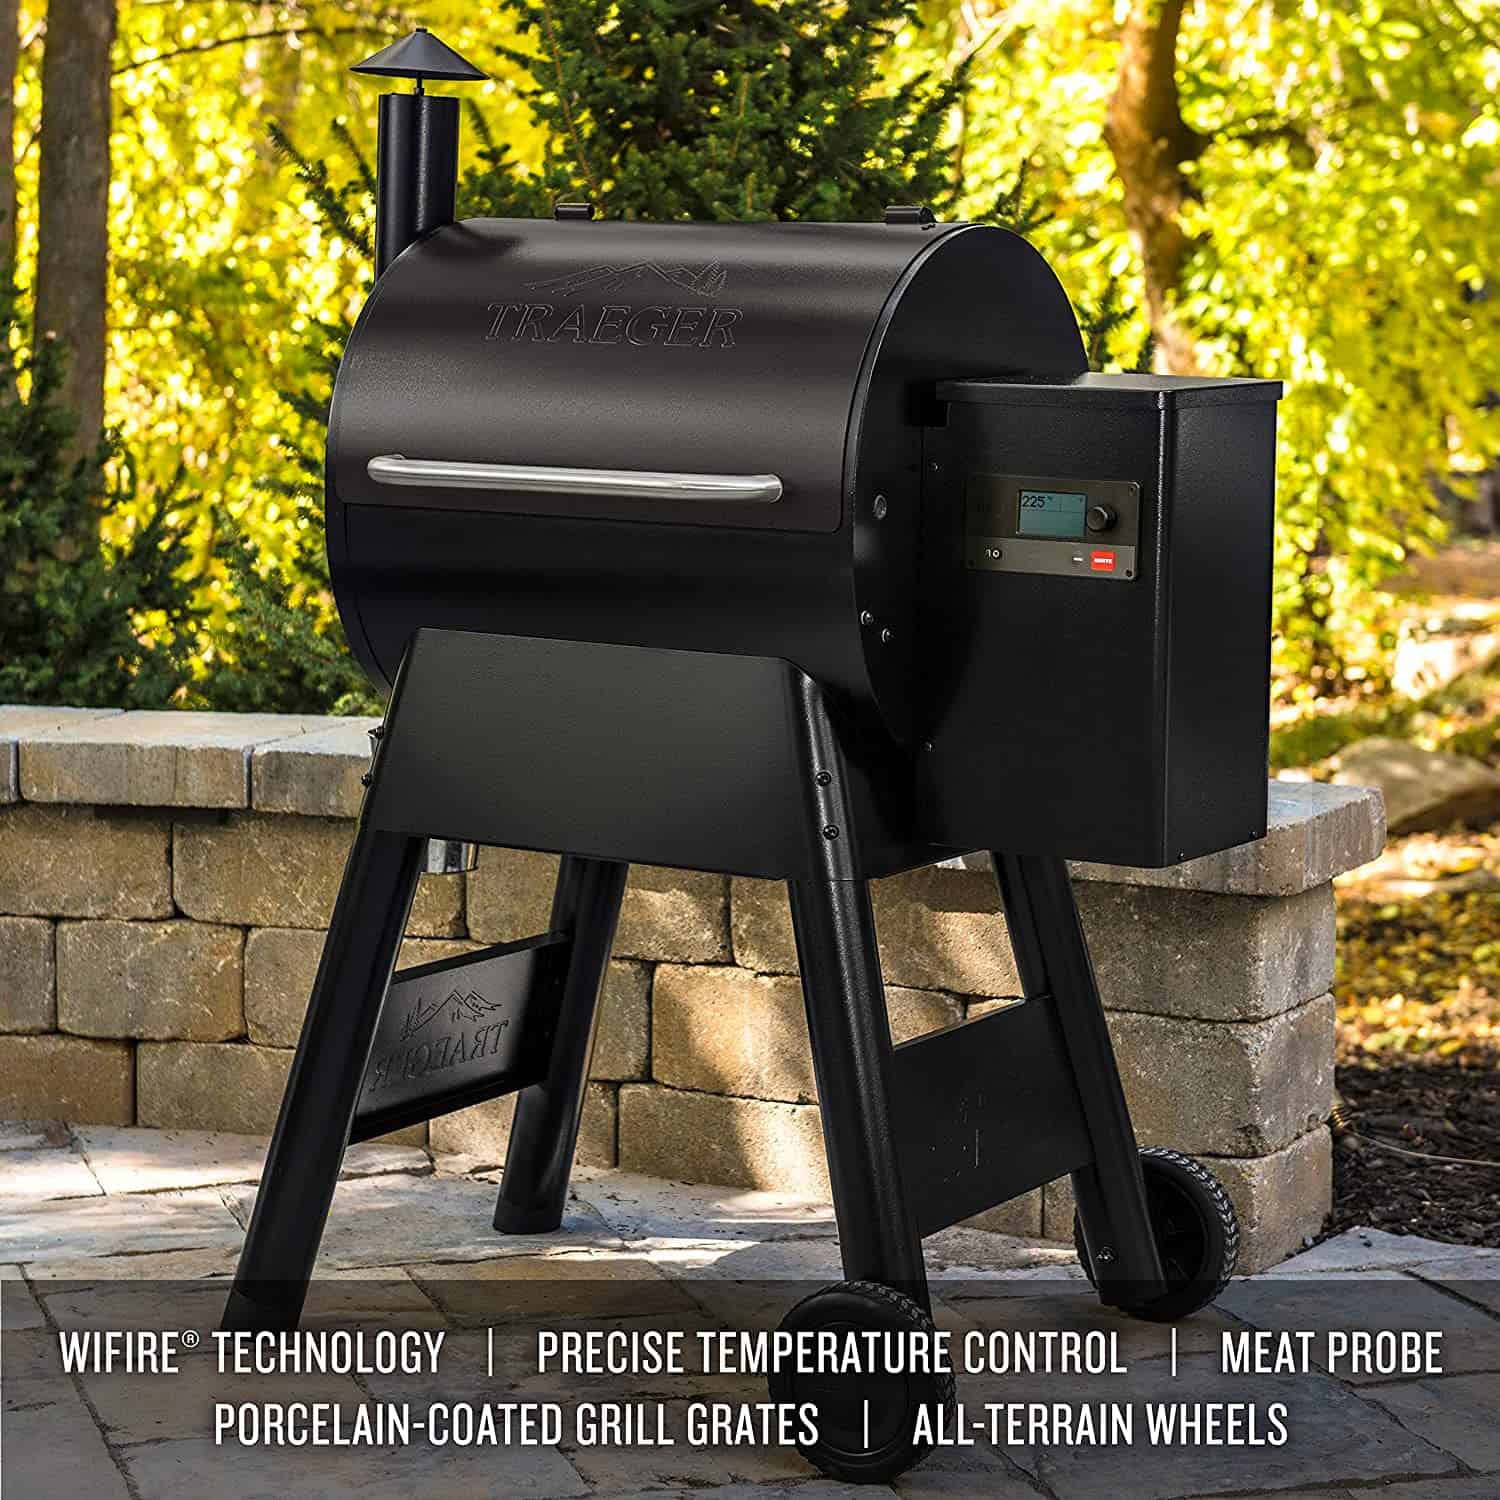 Traeger Grills Pro Series 575 Wood Pellet Grill and Smoker in garden